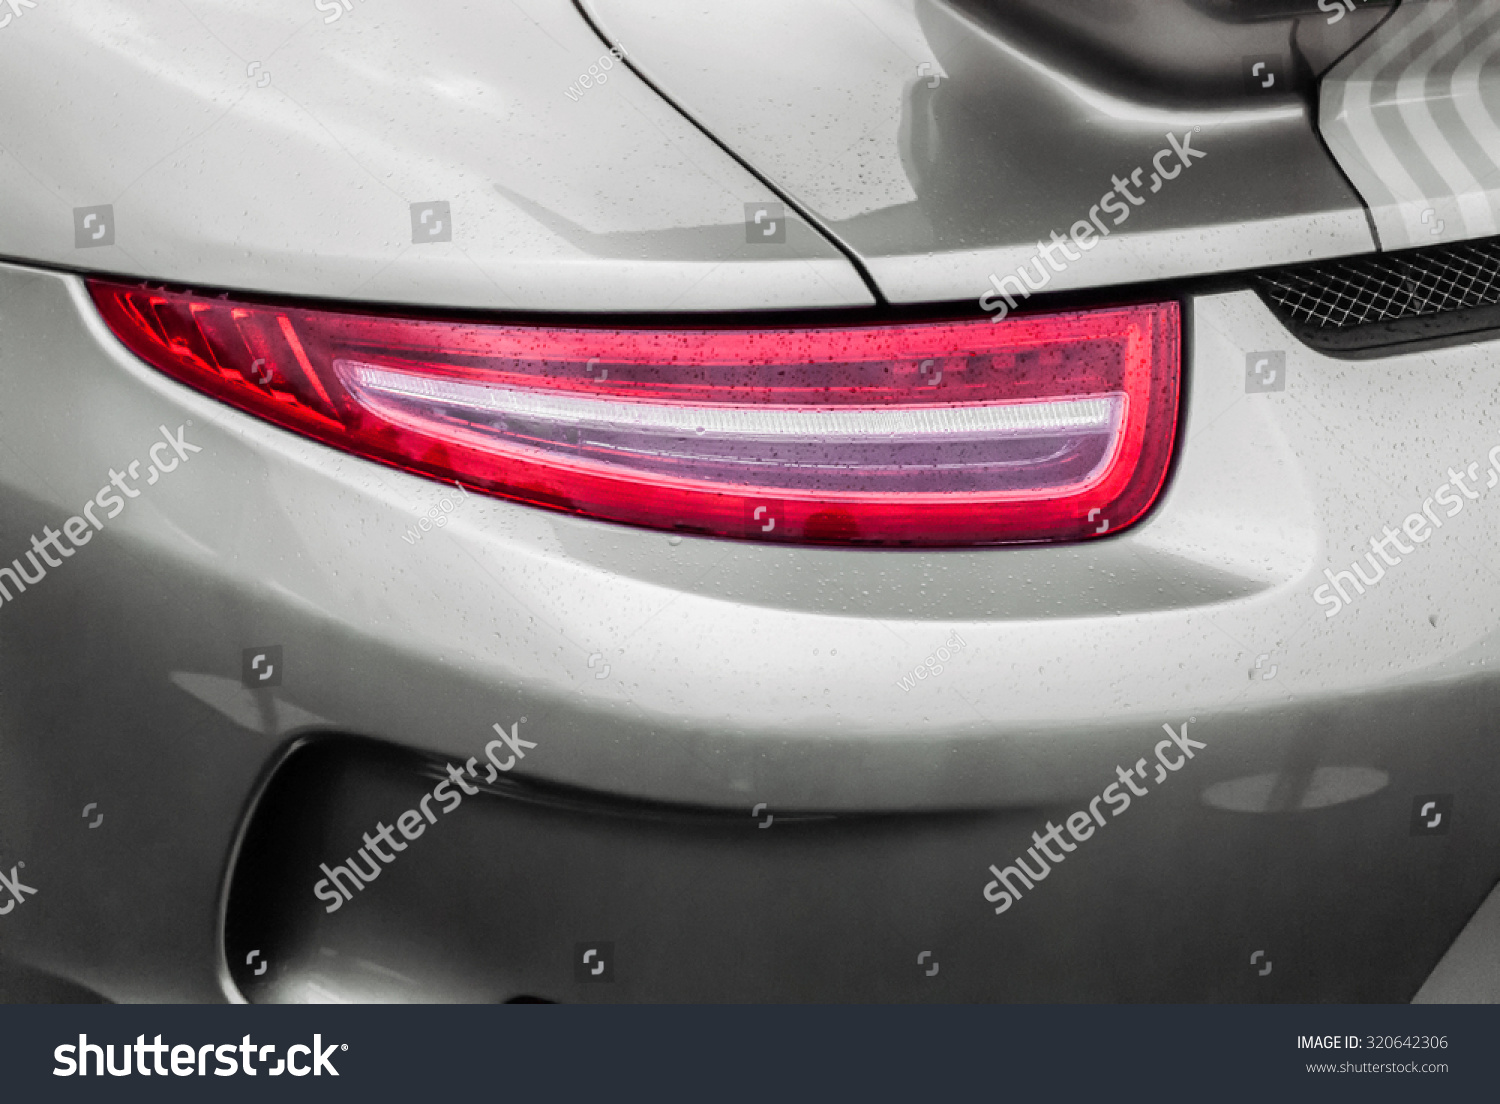 Tail light of sport grey car with rain drops and shadows. Closeup headlights of car. Modern luxury car close-up banner background. Concept of expensive, sports auto Closeup headlights Porsche 911 #320642306